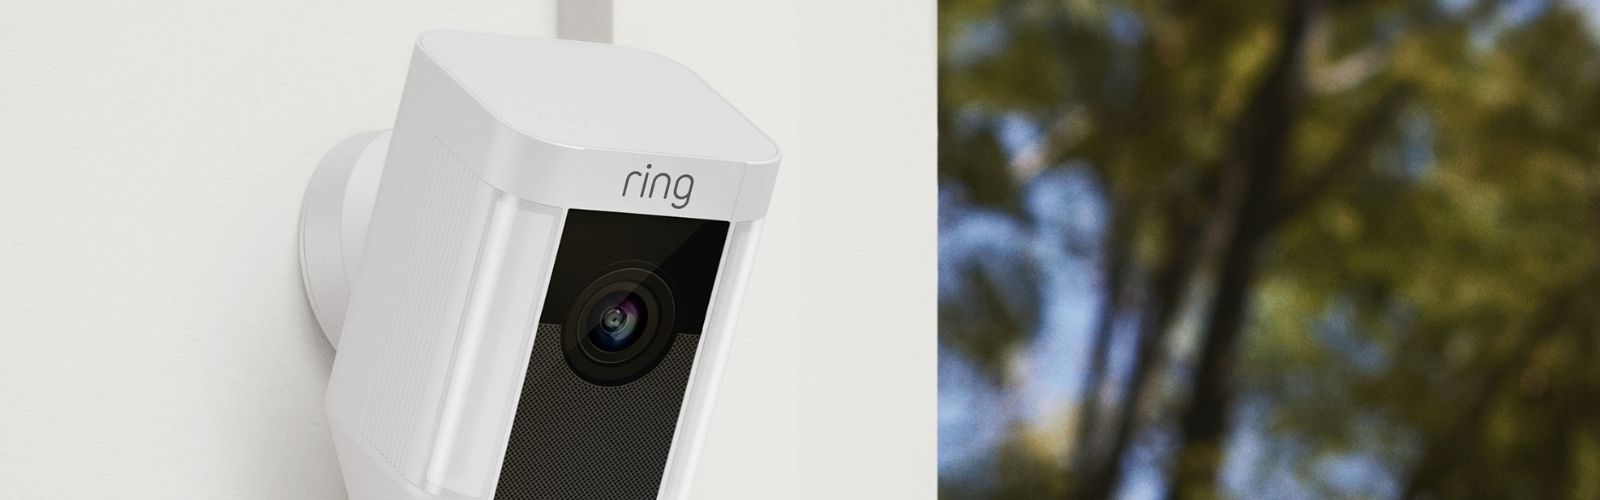 how much does the ring protect plan cost